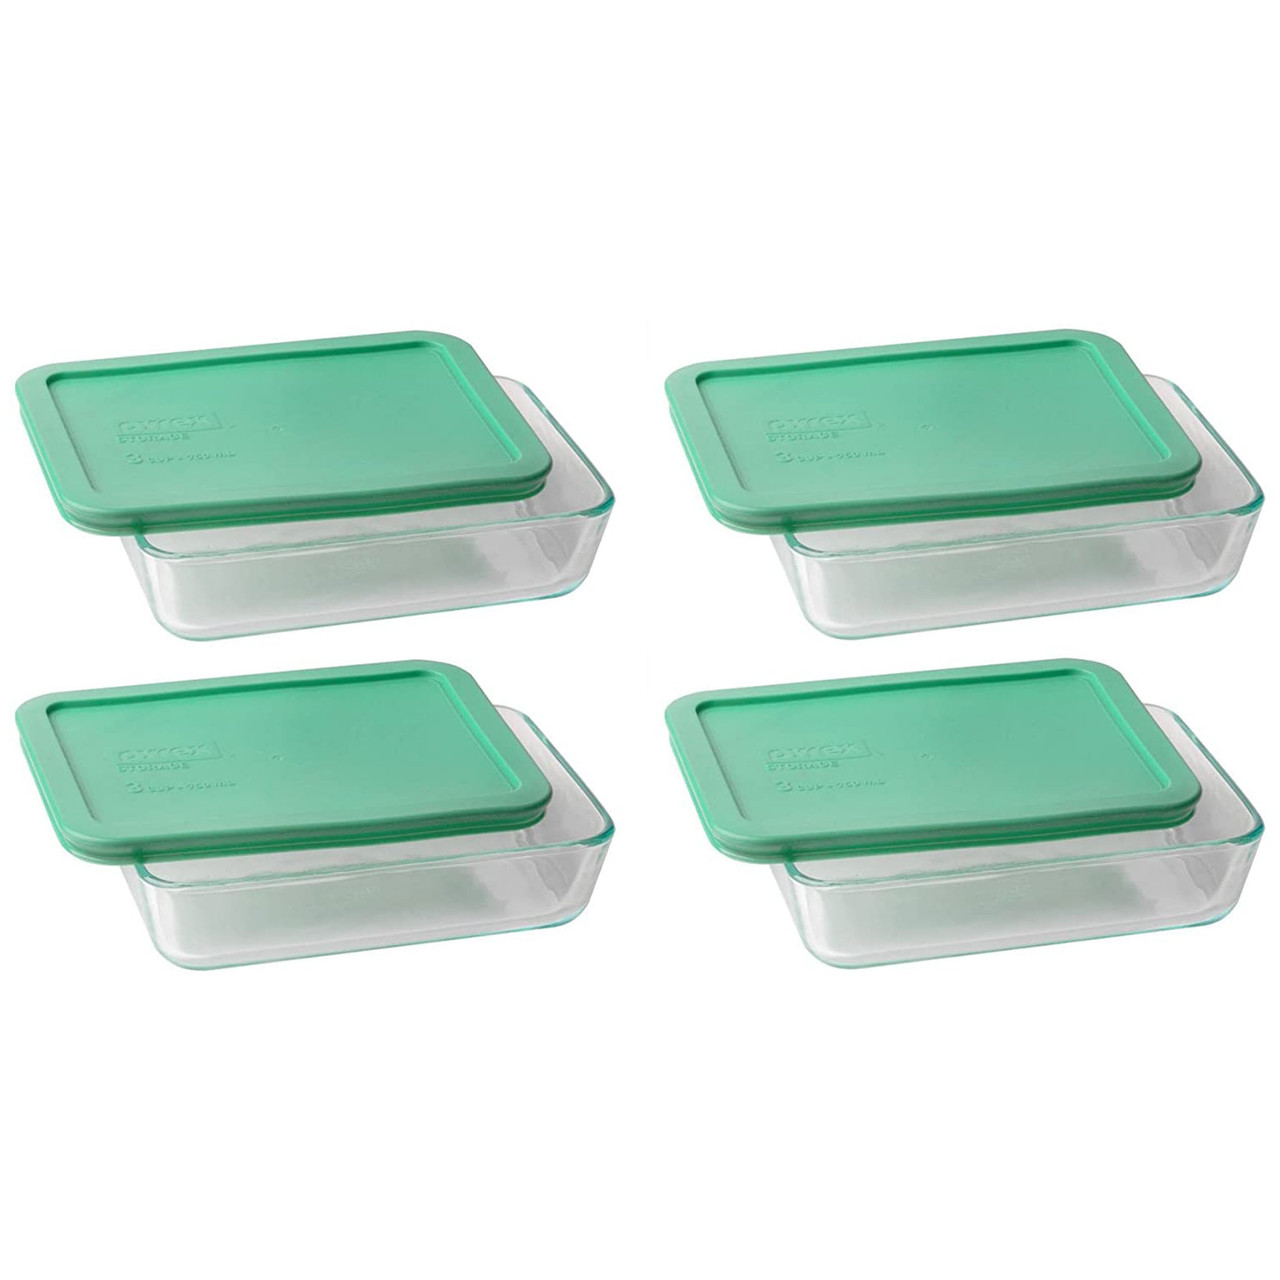 Pyrex 3-Cup Glass Baking Storage Dish Container with Plastic Lid (Set of 6)